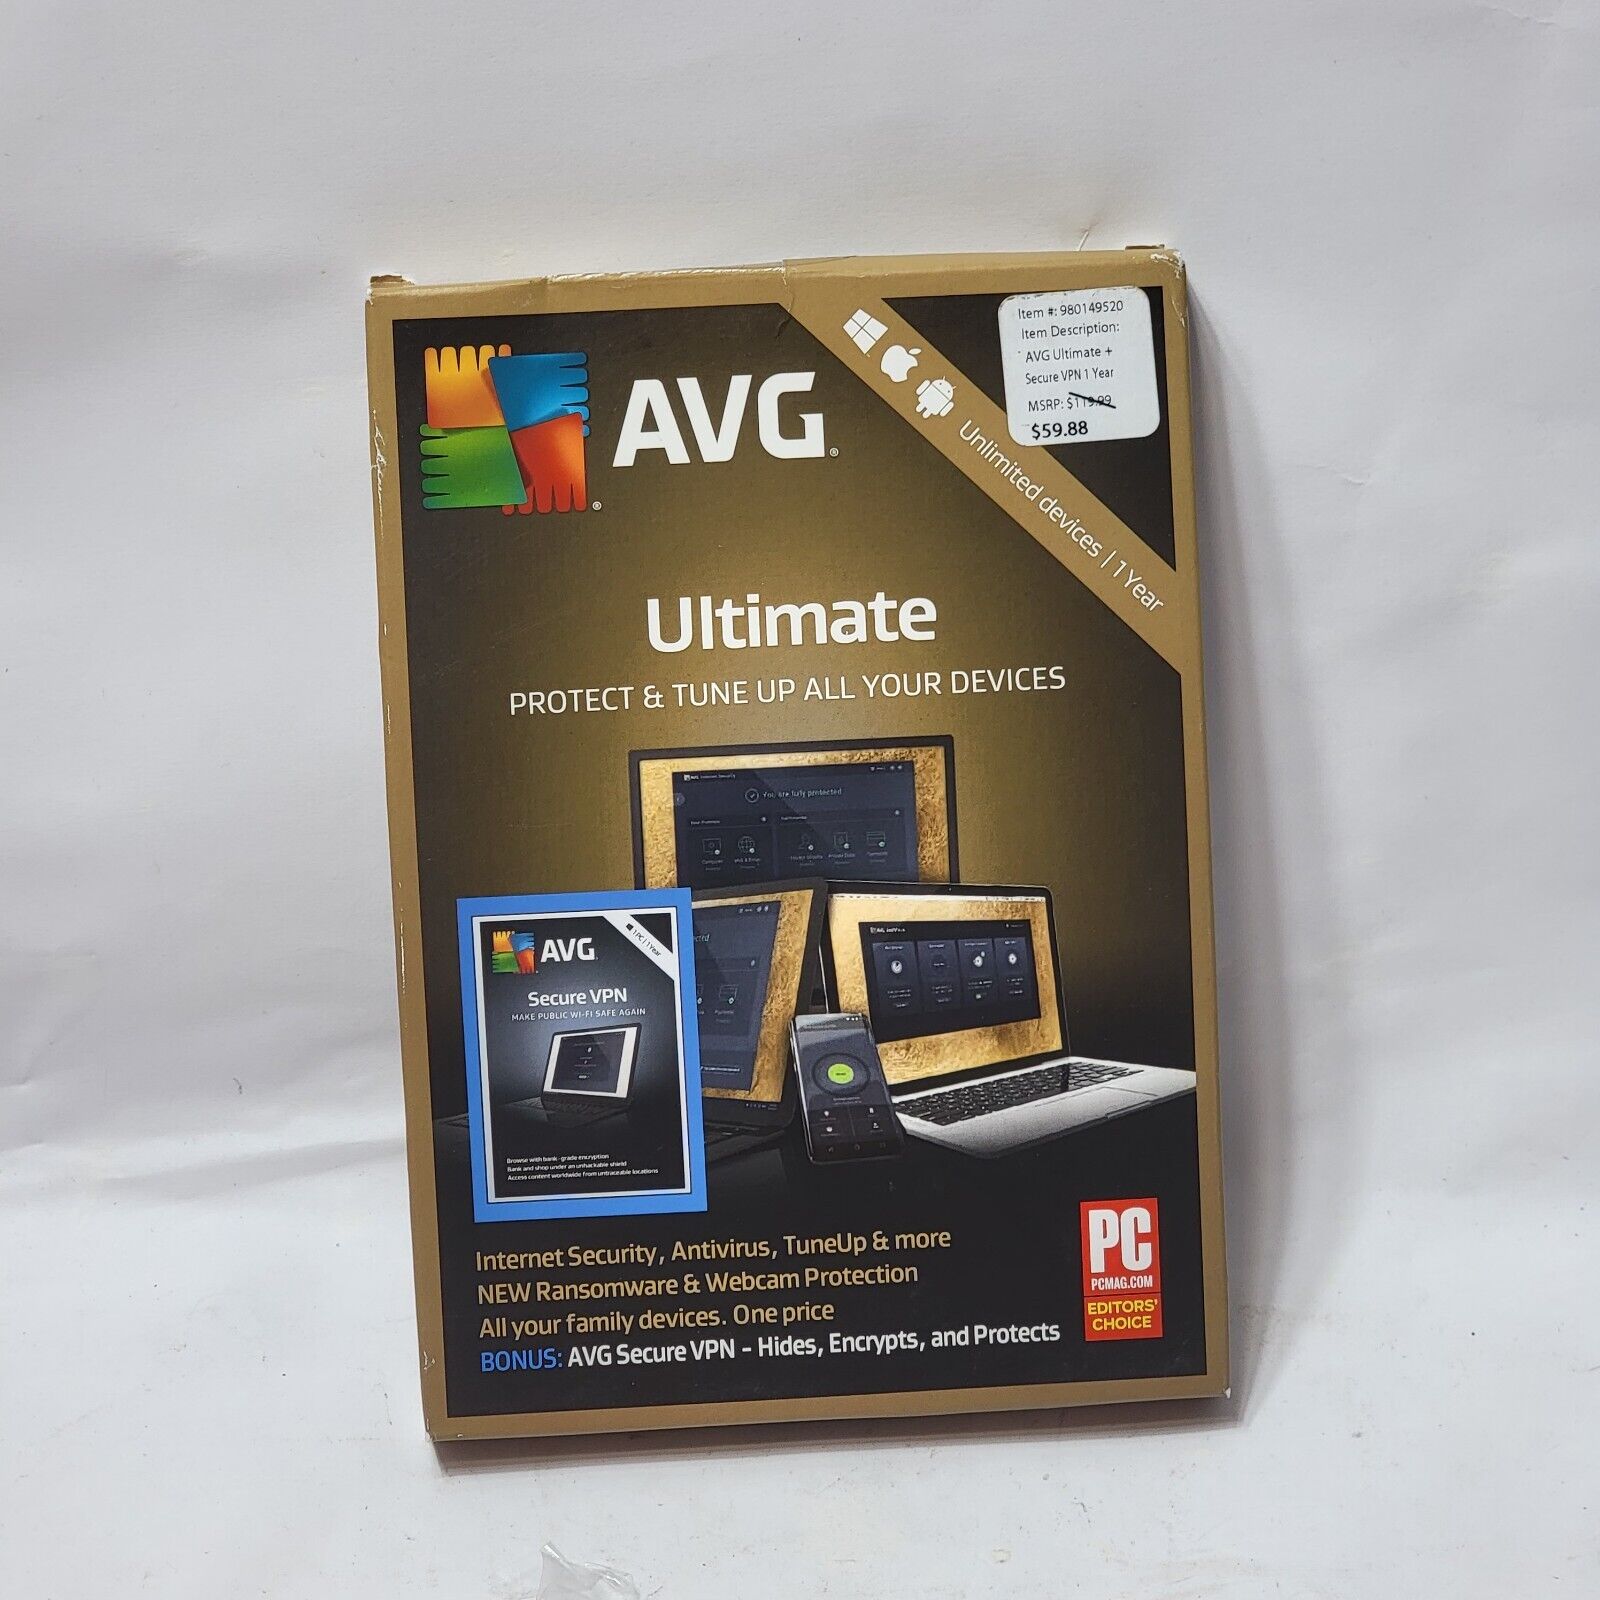 AVG Ultimate Protect & Tune Up Devices + AVG Secure VPN